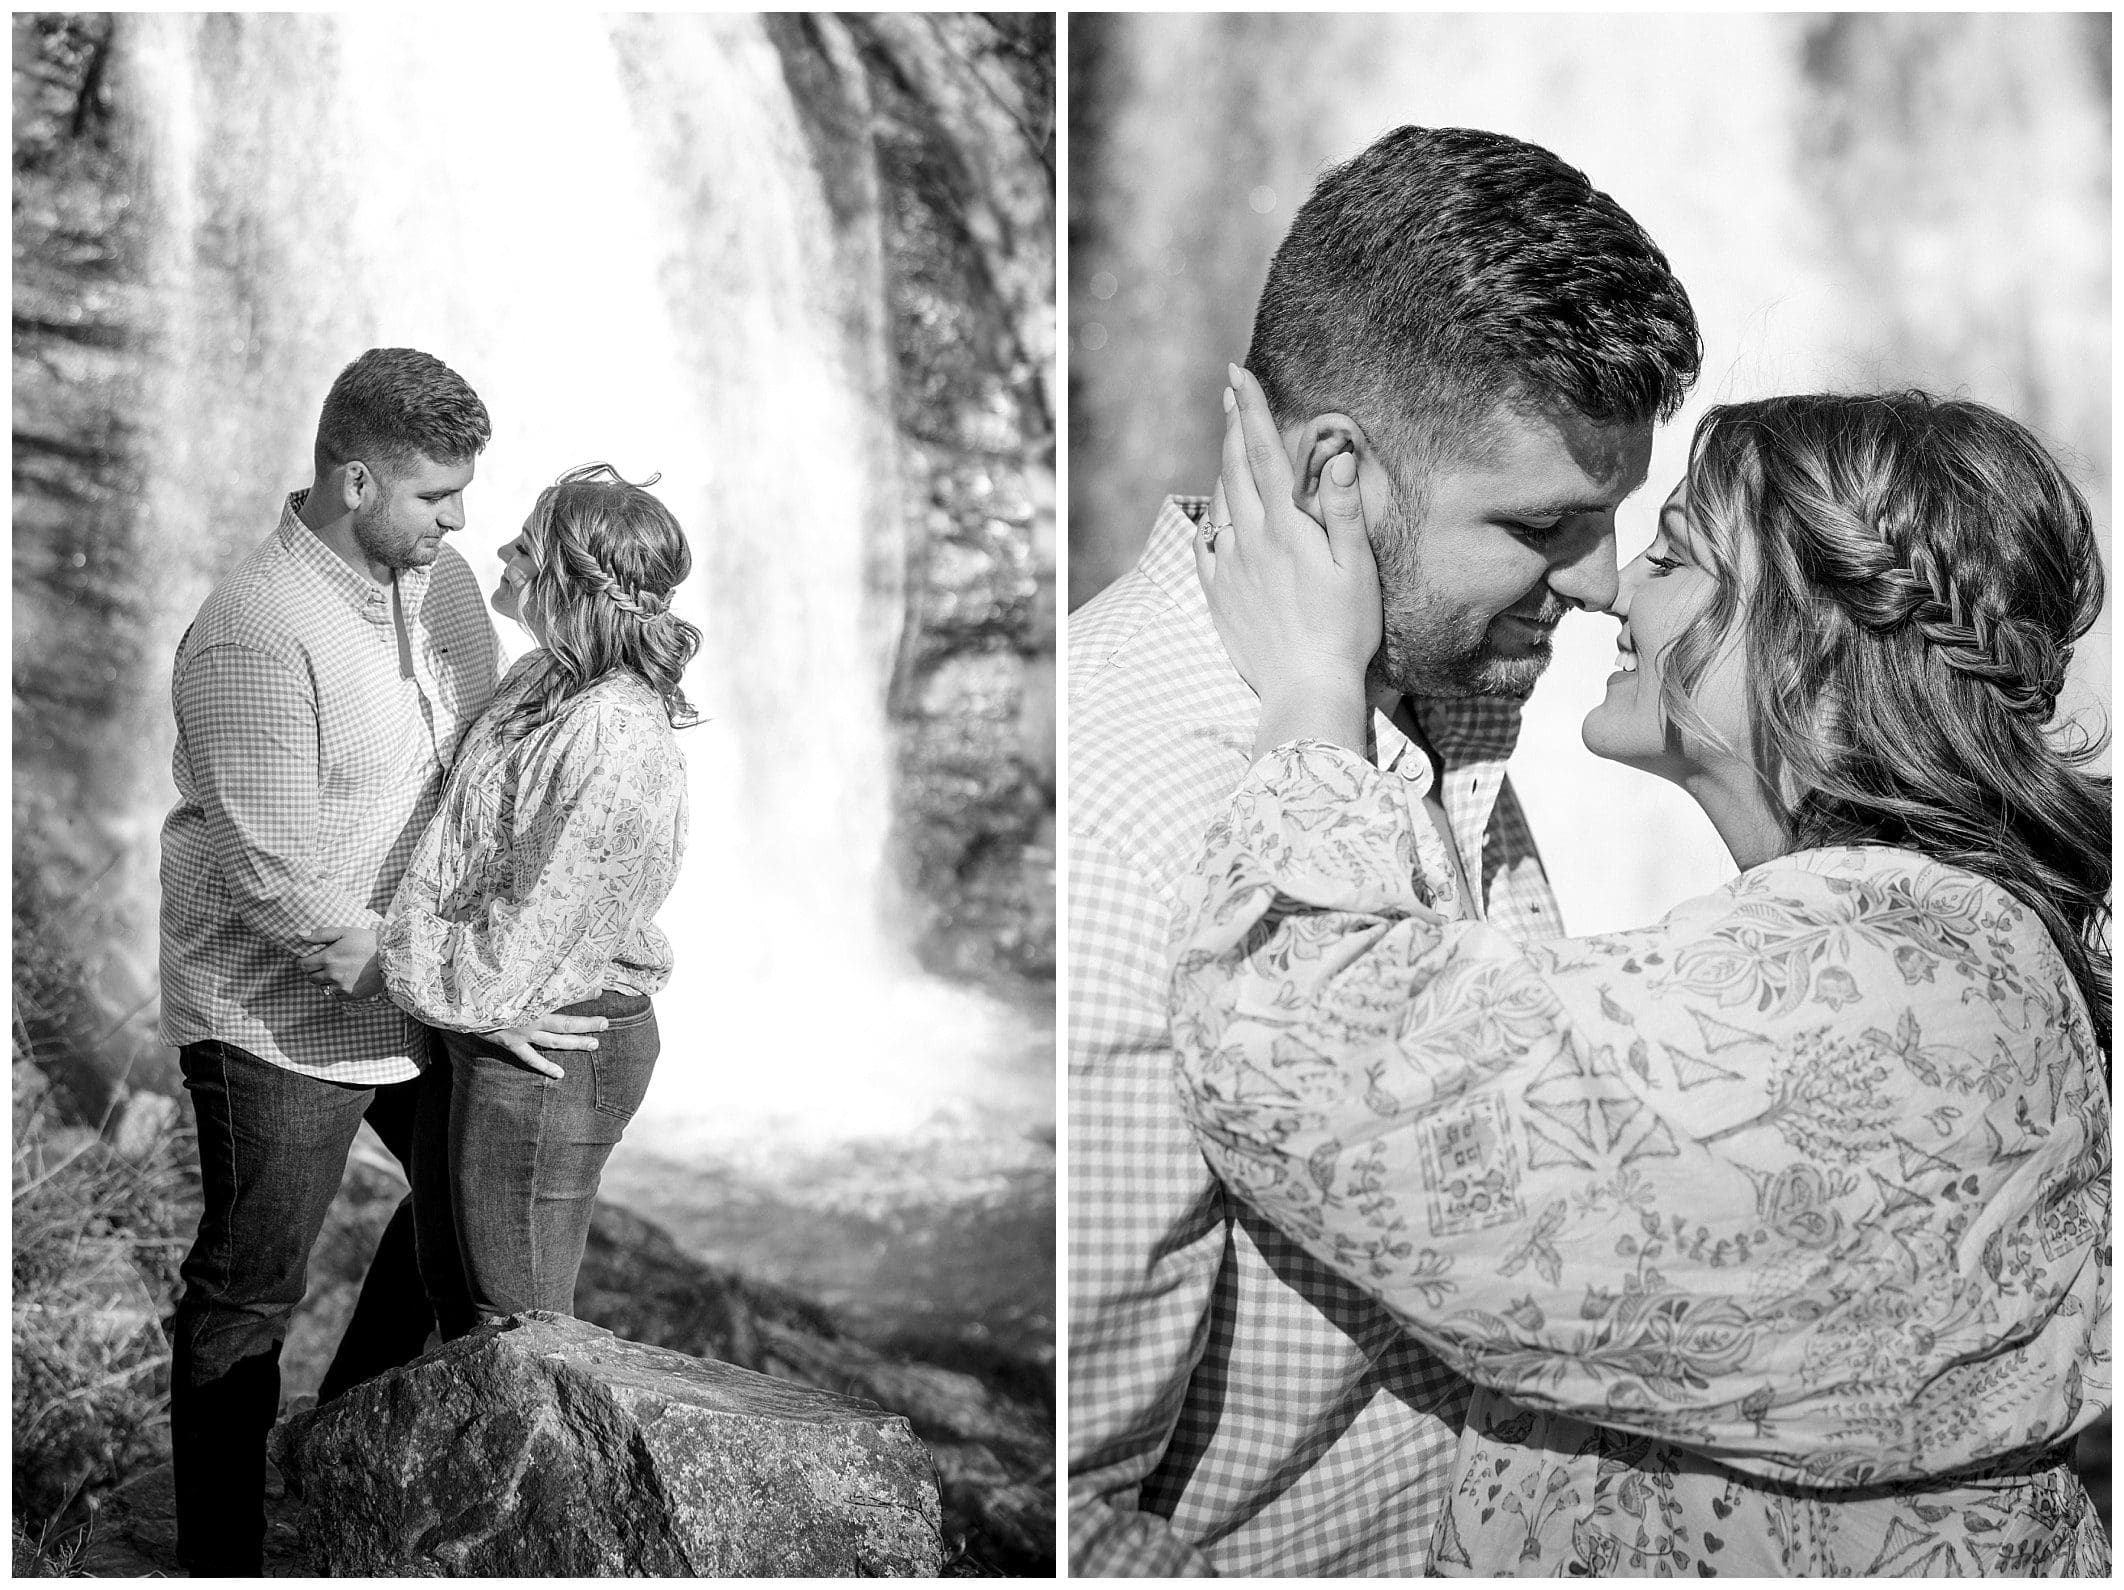 Black and white photos at waterfall in Asheville, NC.